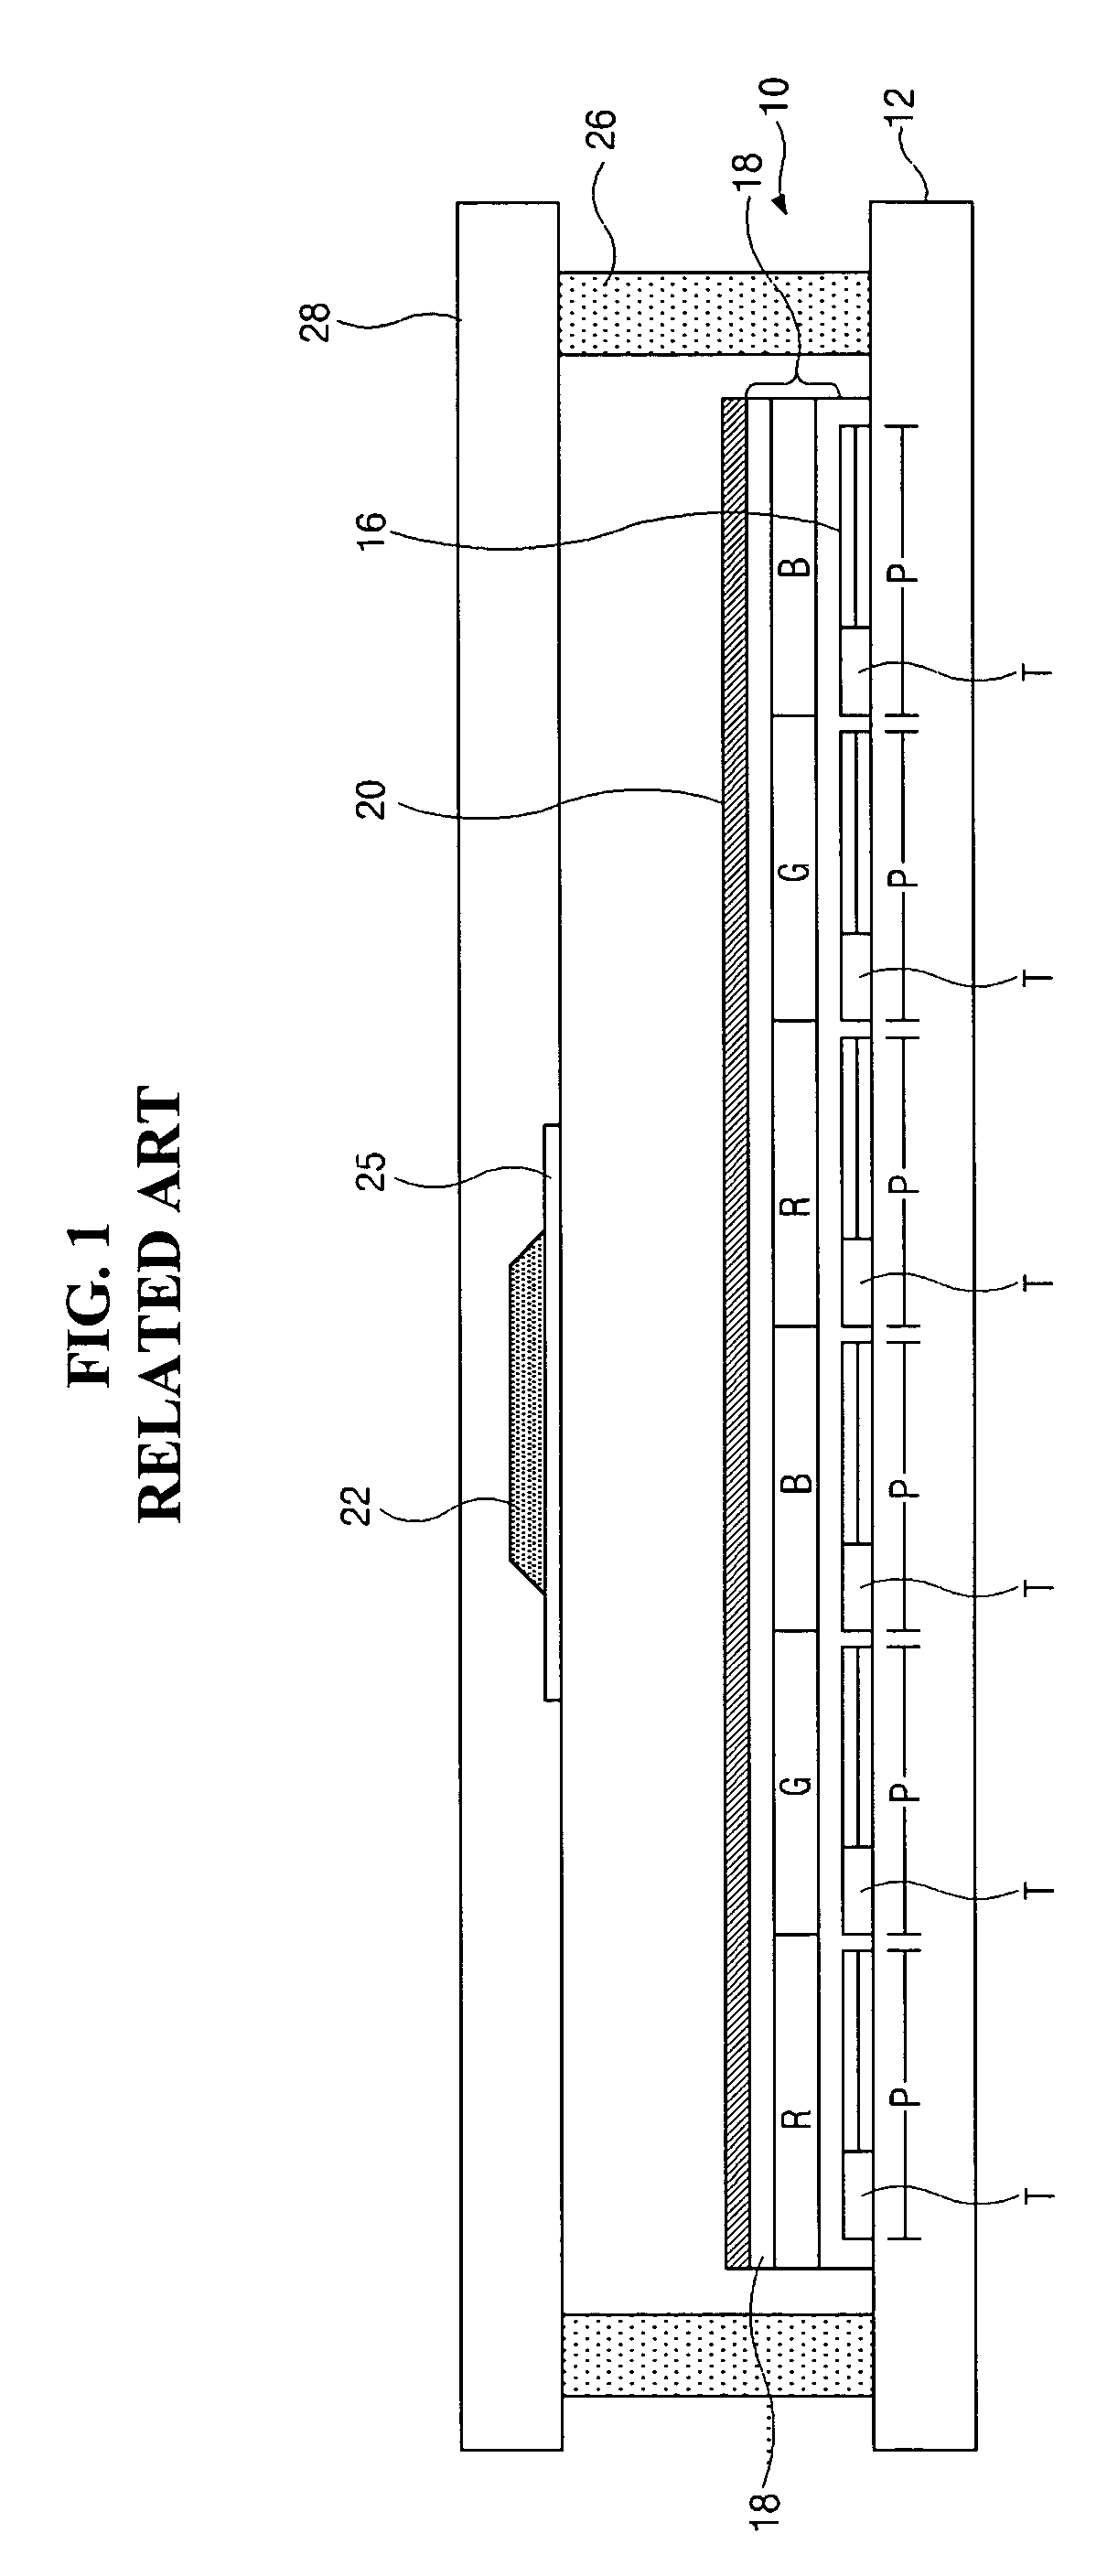 Organic electroluminescent display device and method of fabricating the same